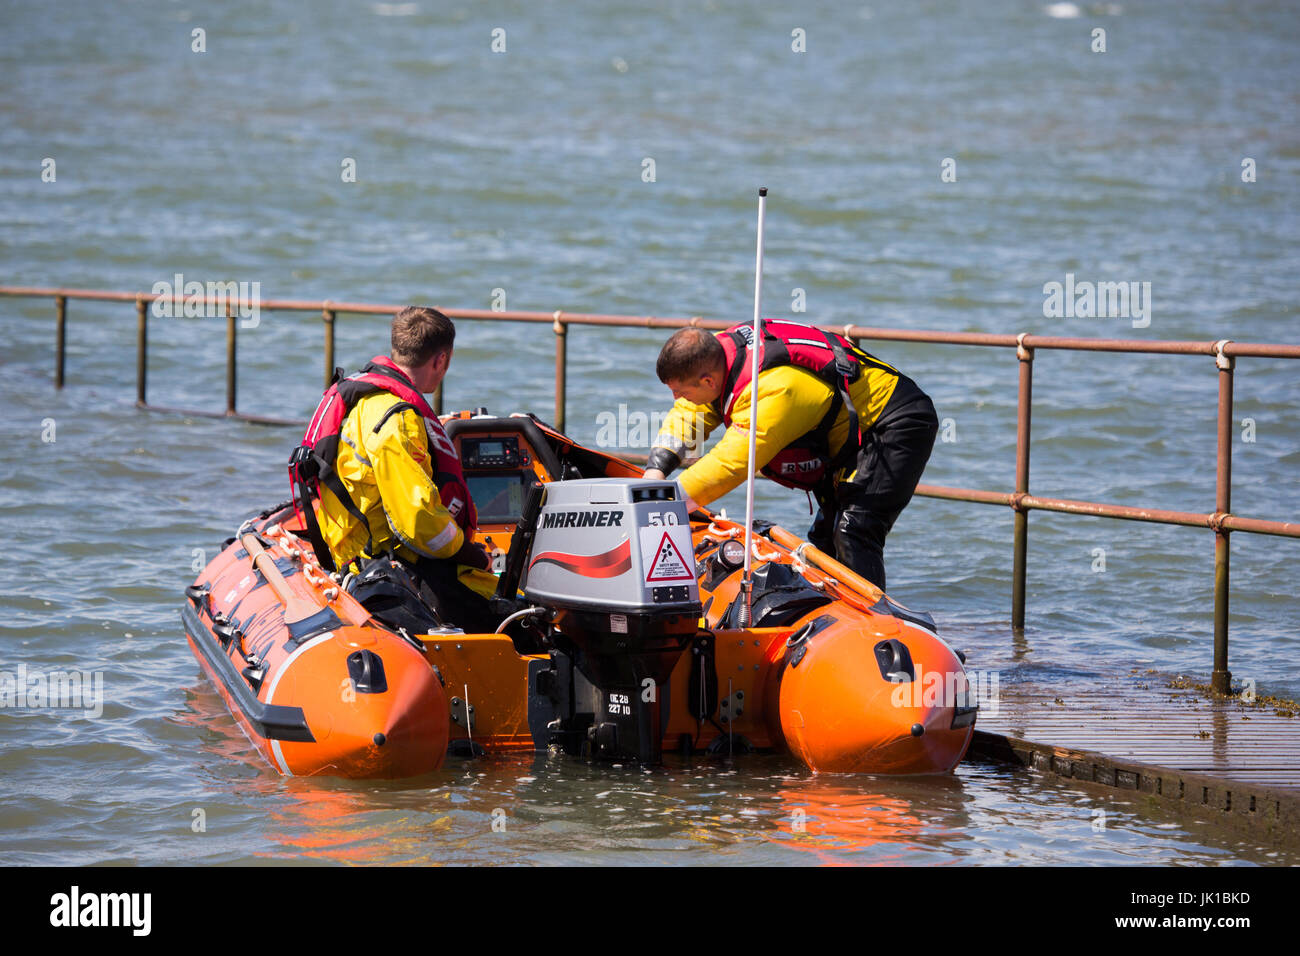 An RLNI inshore rescue boat preparing for launch during a training exercise Stock Photo